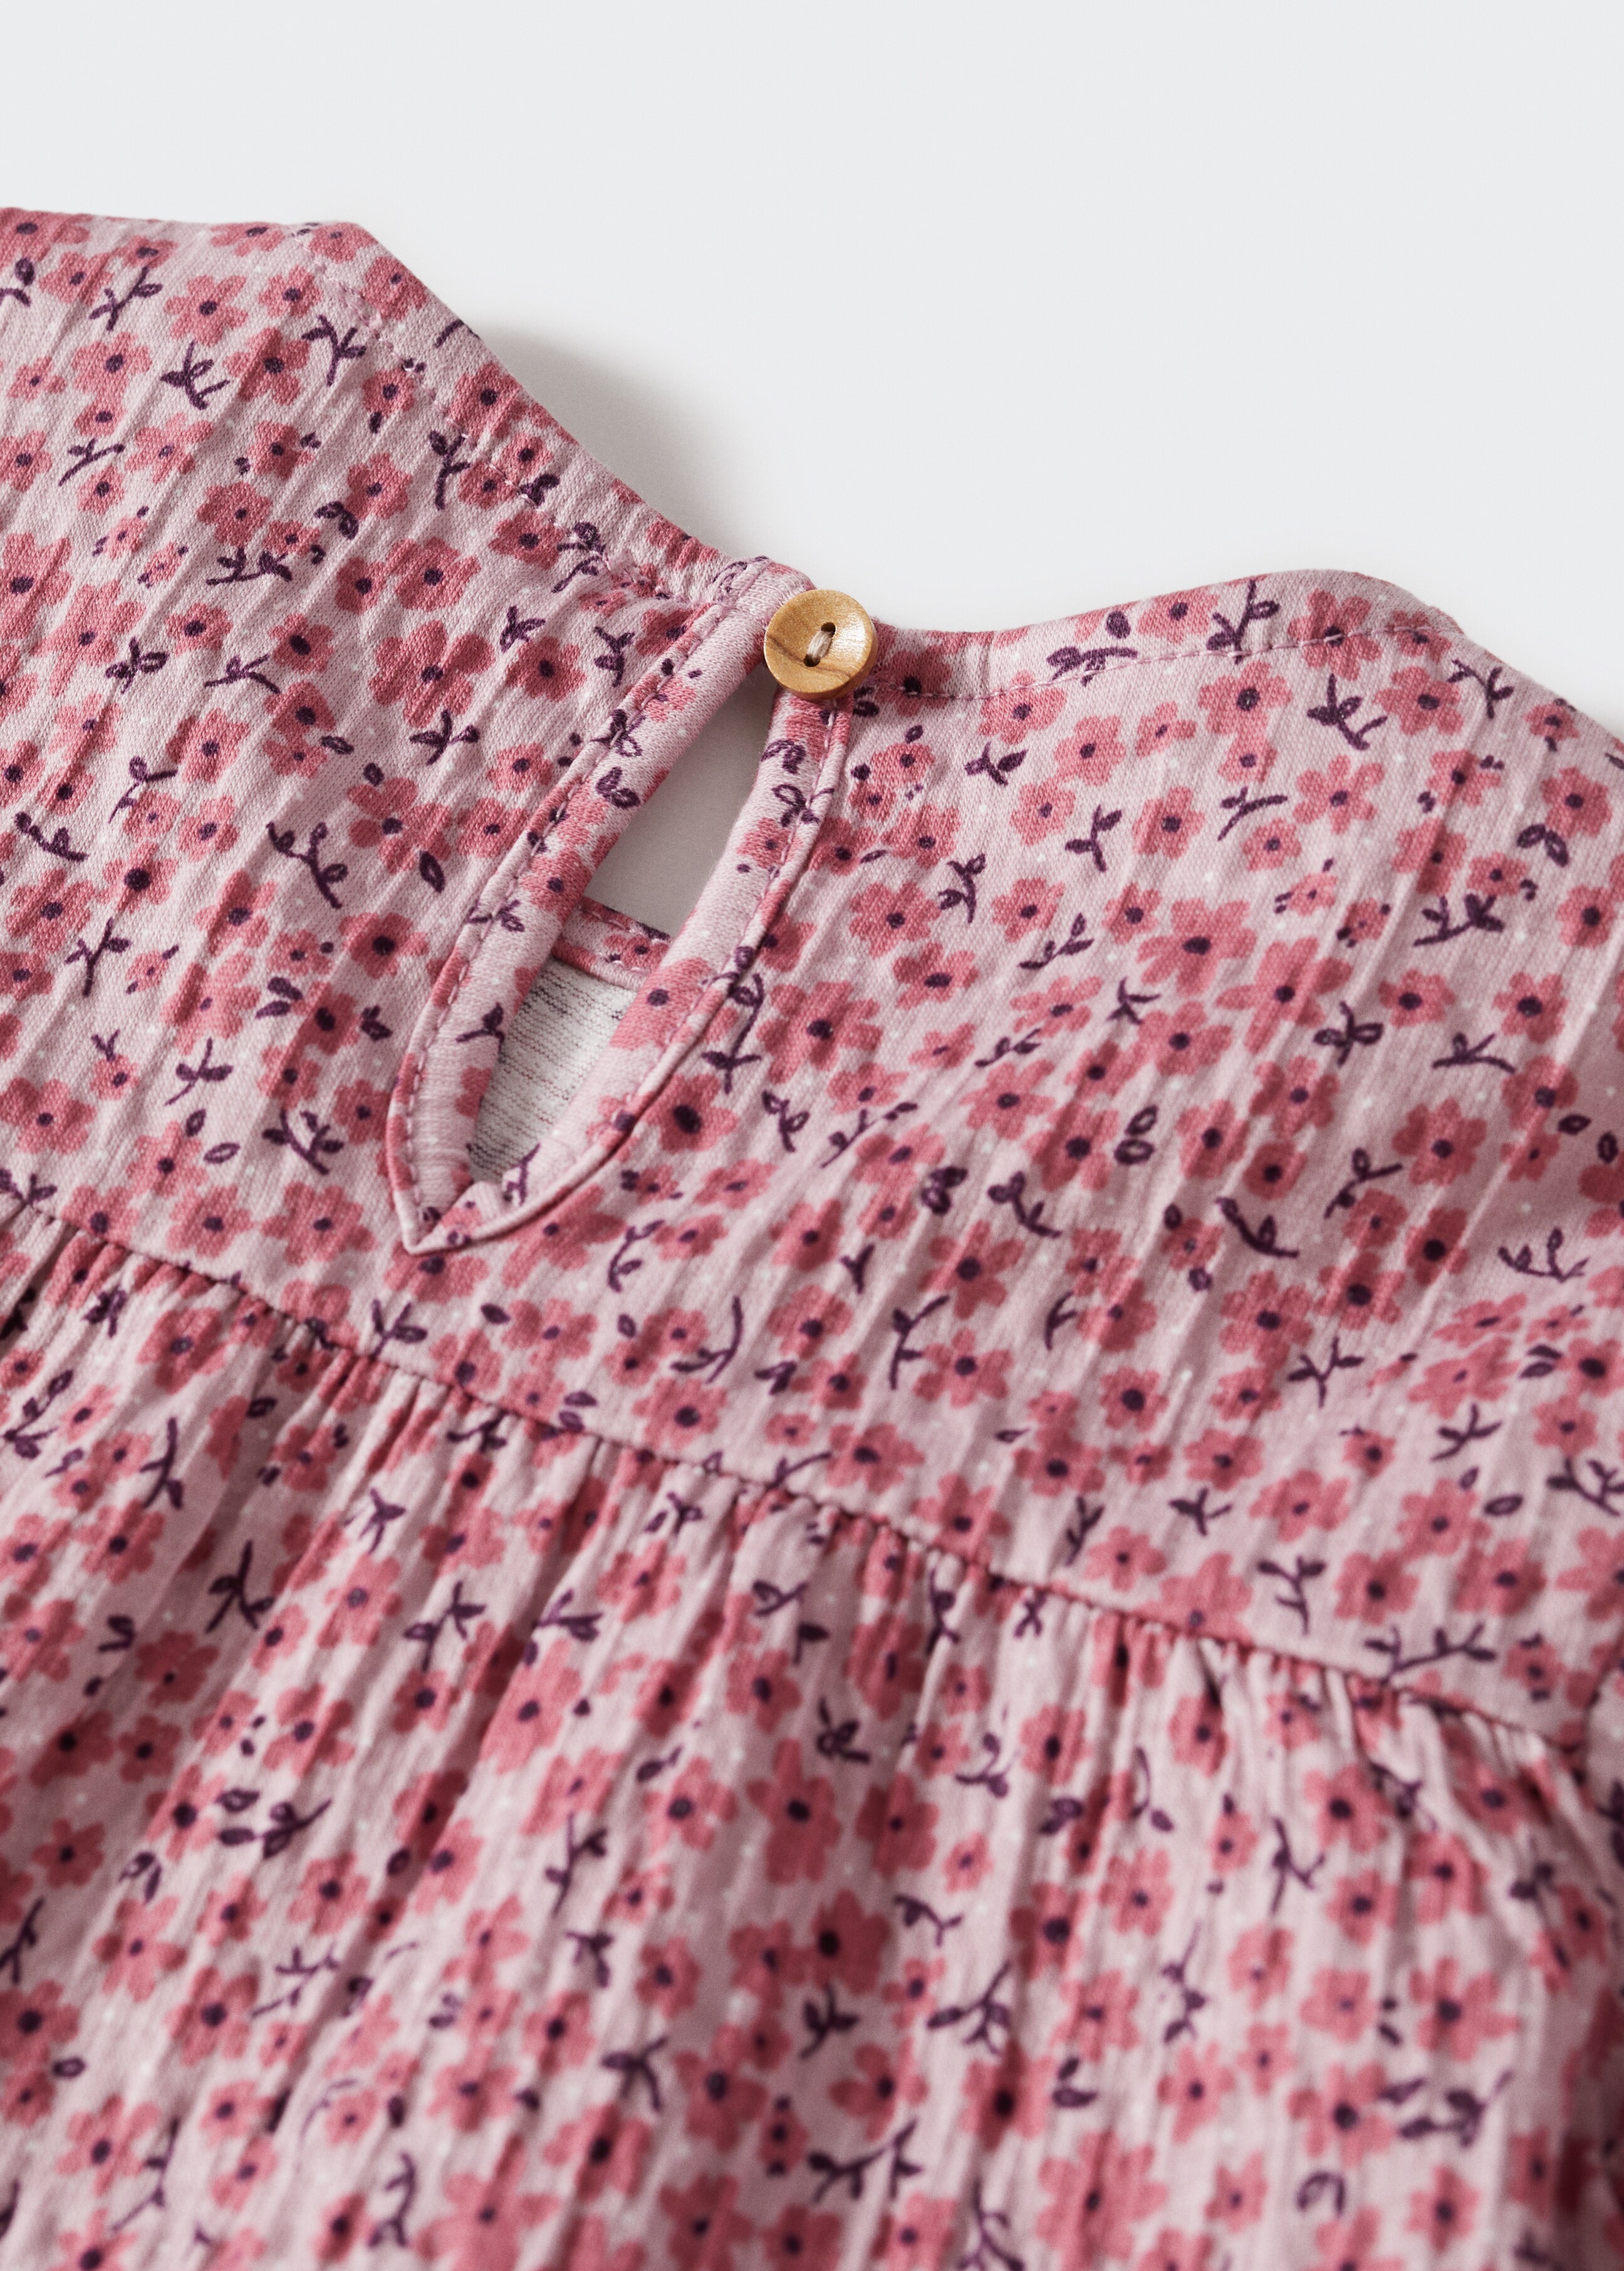 Floral ruffle dress - Details of the article 9